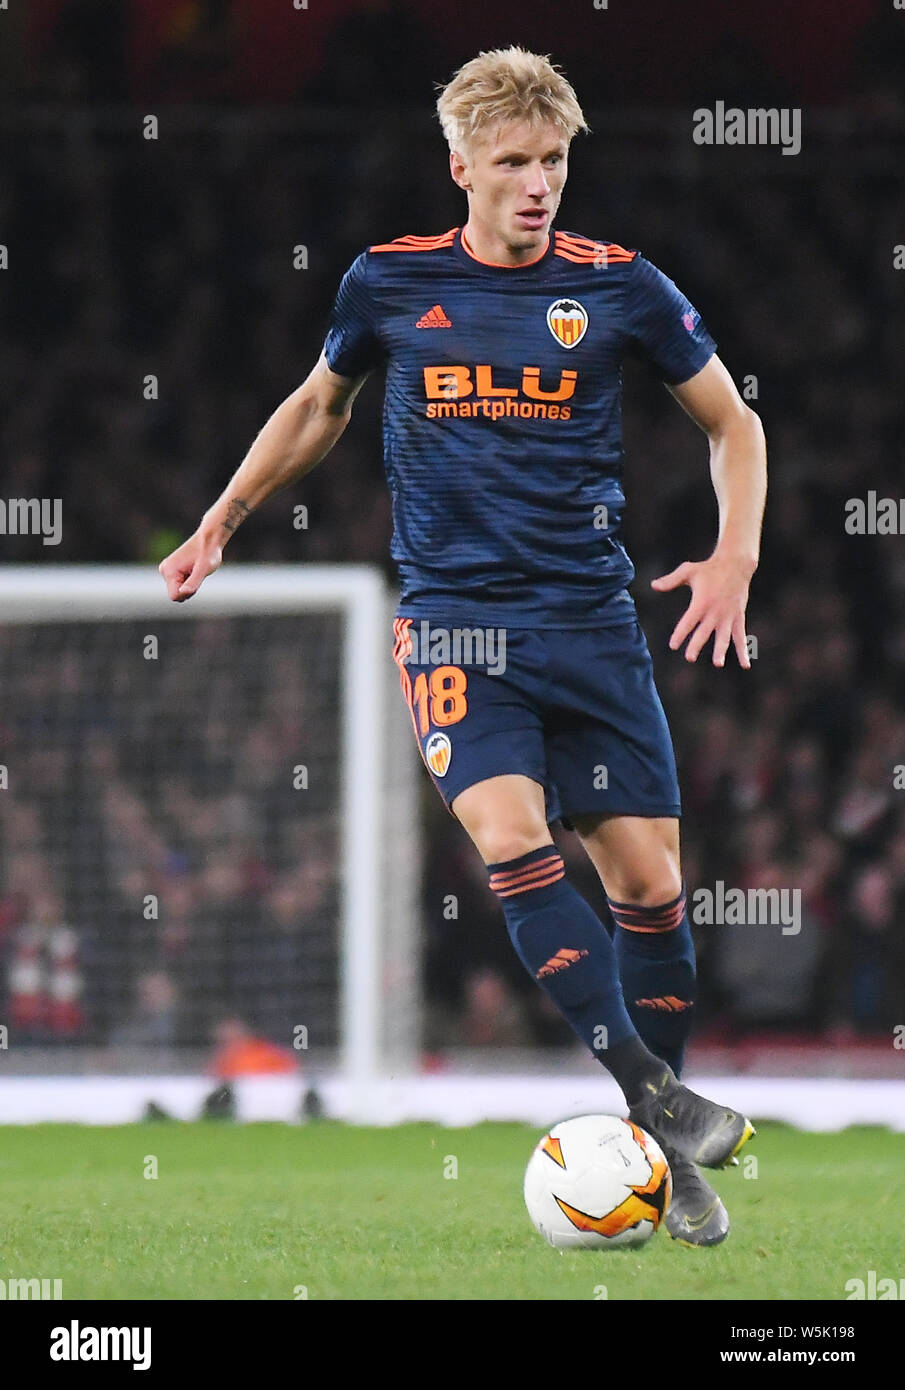 LONDON, ENGLAND - MAY 2, 2019: Daniel Wass of Valencia pictured during the first leg of the 2018/19 UEFA Europa League Semi-finals game between Arsenal FC (England) and Valencia CF (Spain) at Emirates Stadium. Stock Photo